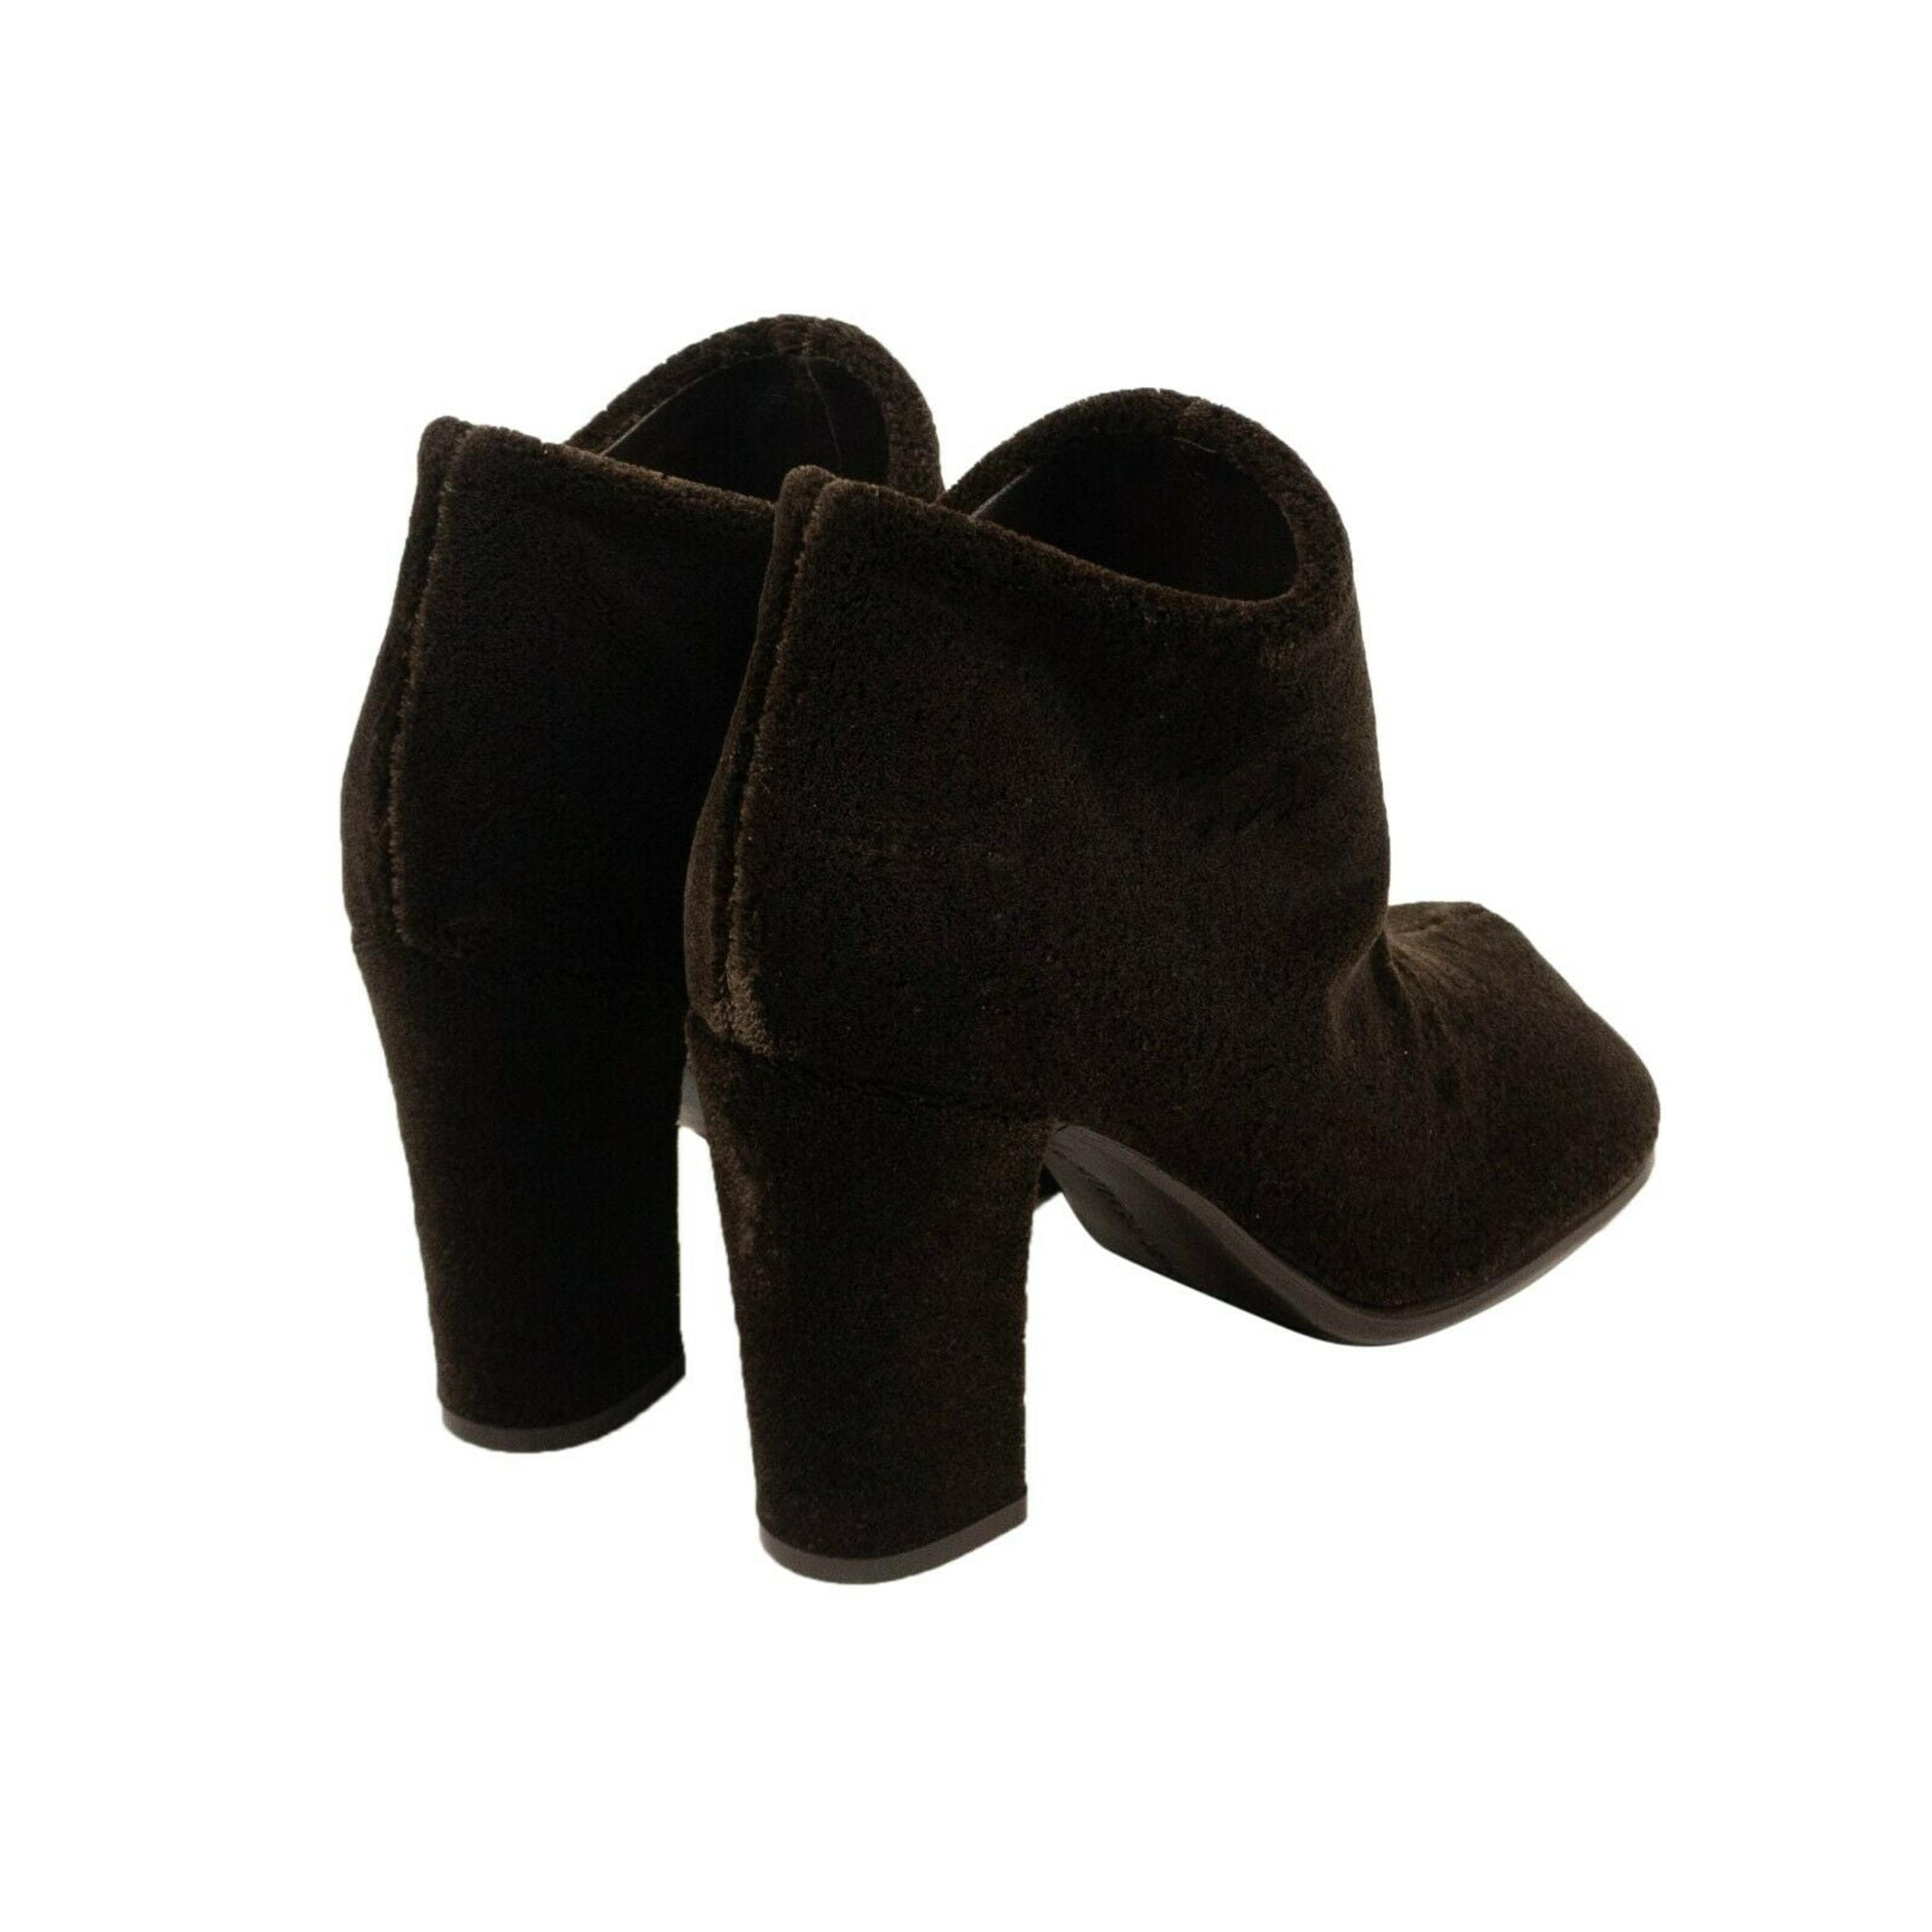 Alternate View 3 of Brown Suede Storm Square Toe Ankle Boots